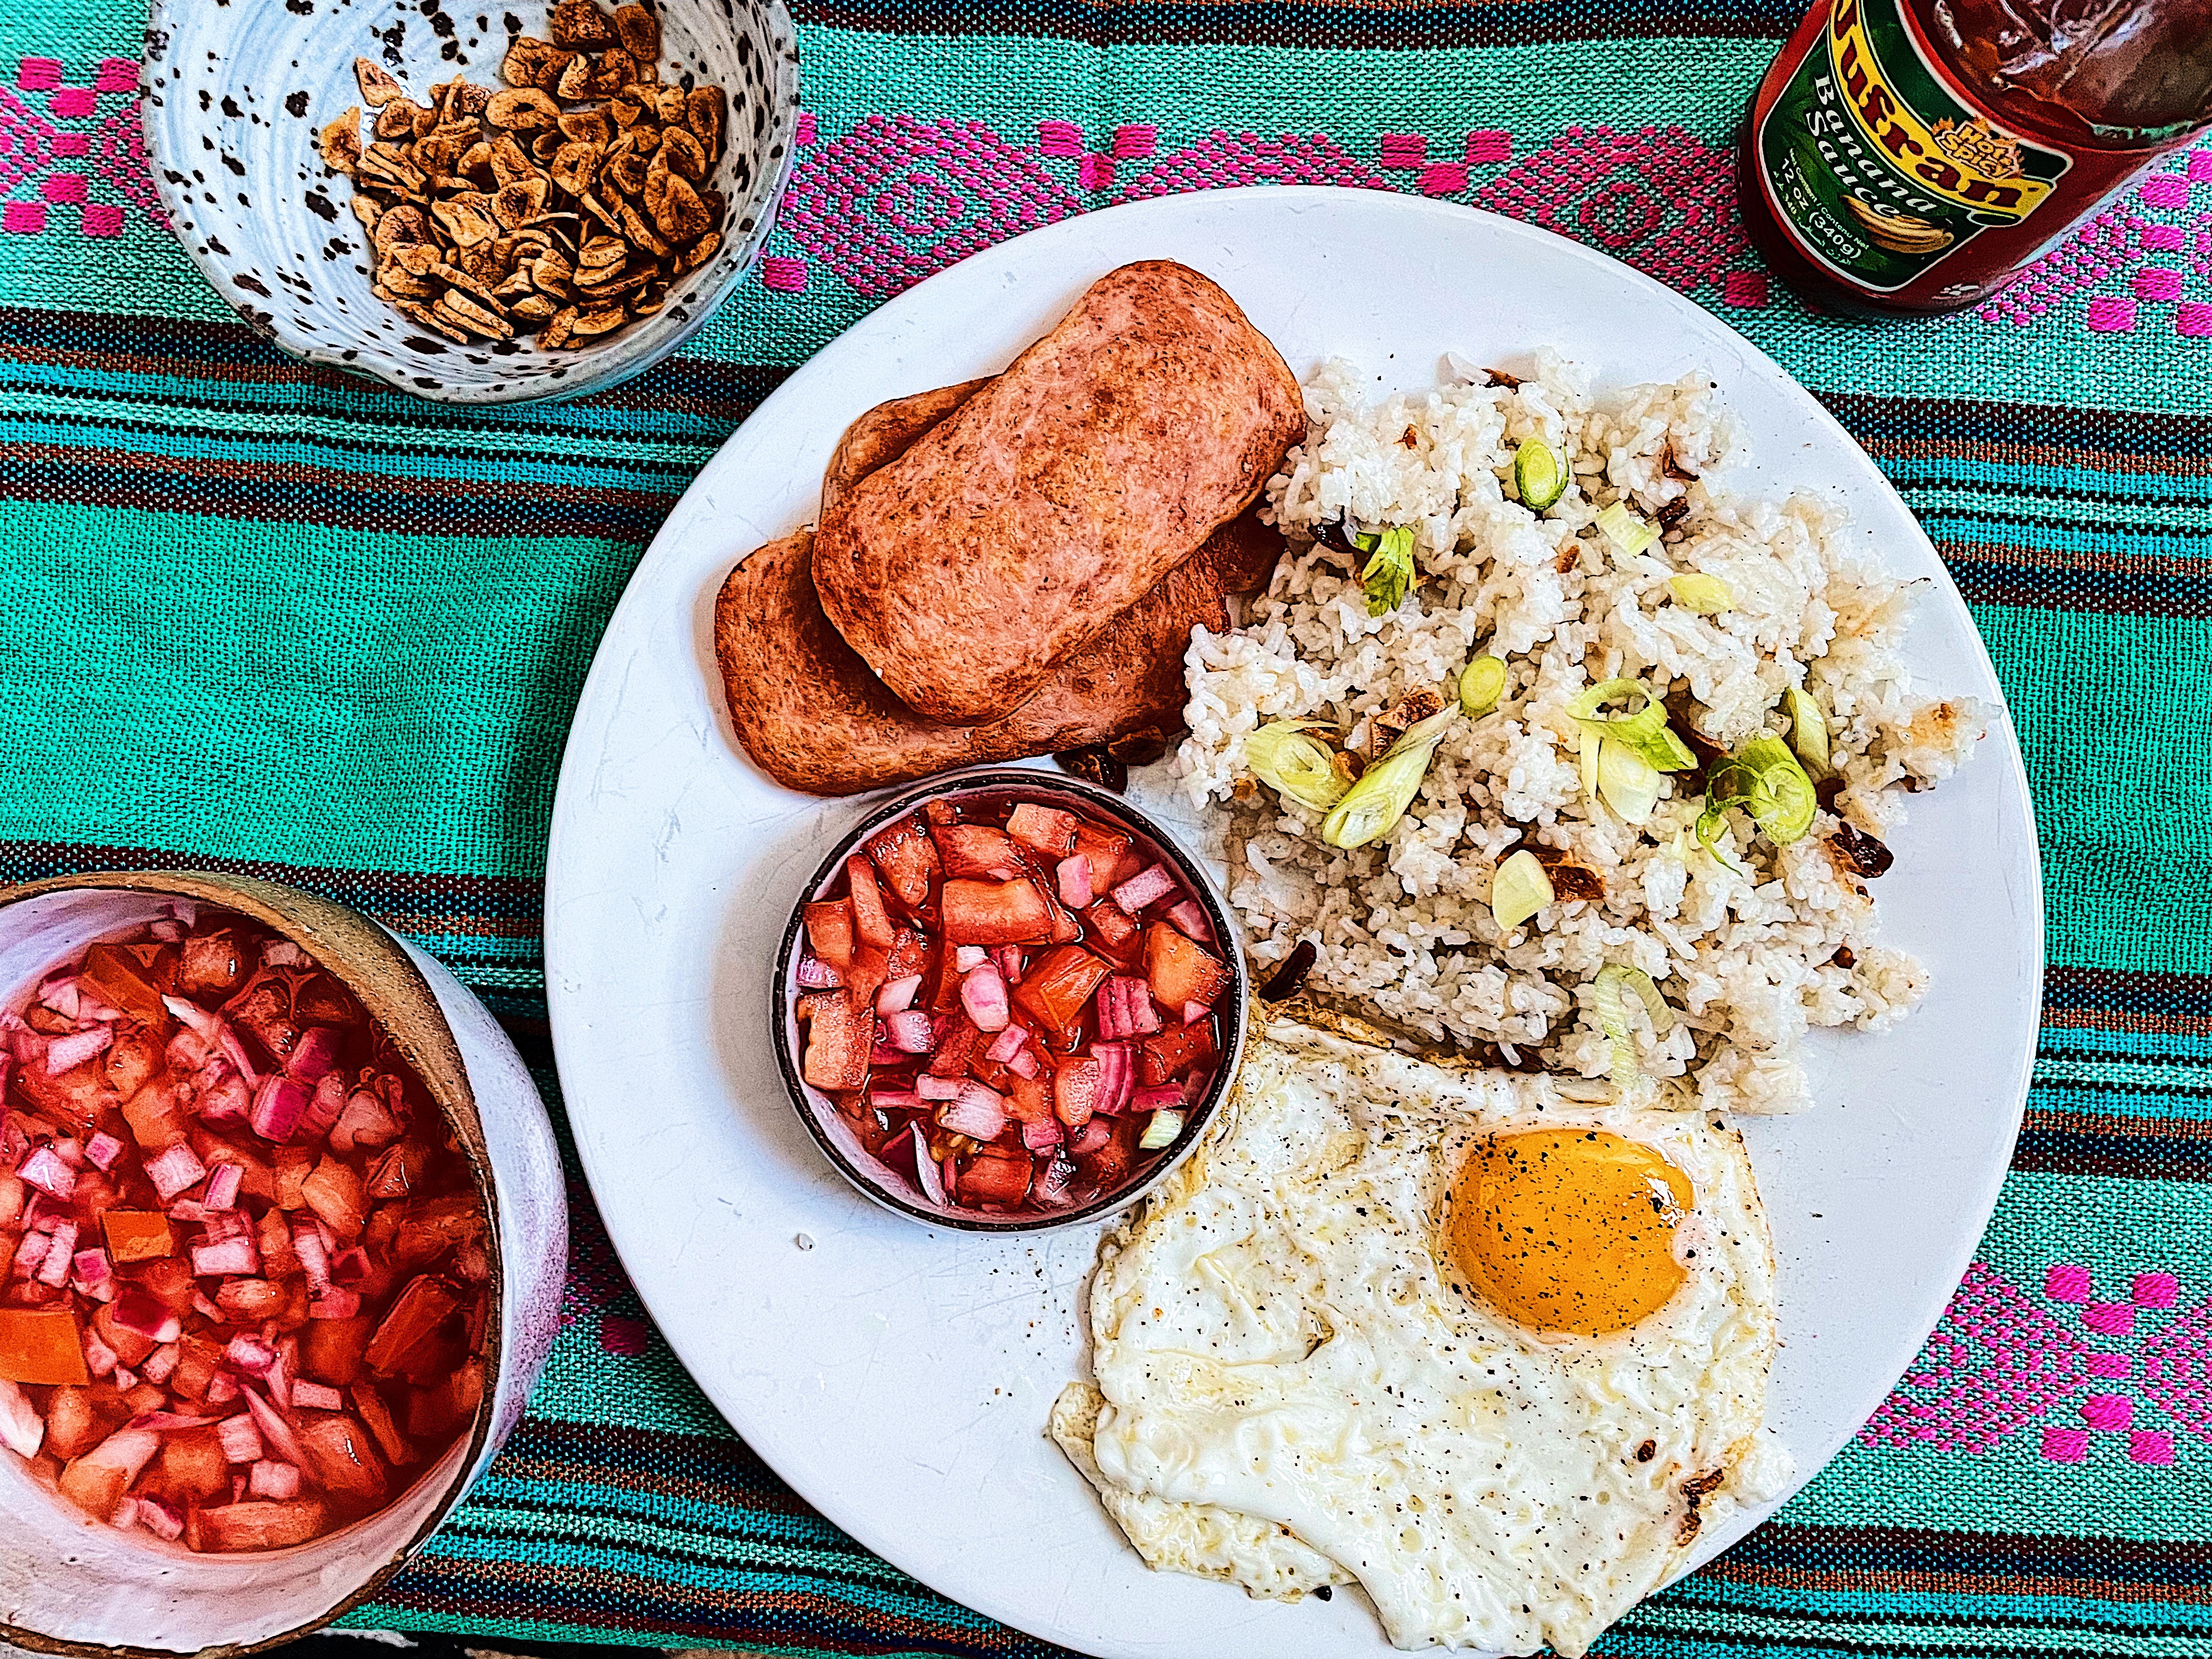 For this Filipino breakfast, the true star is garlic-studded fried rice image